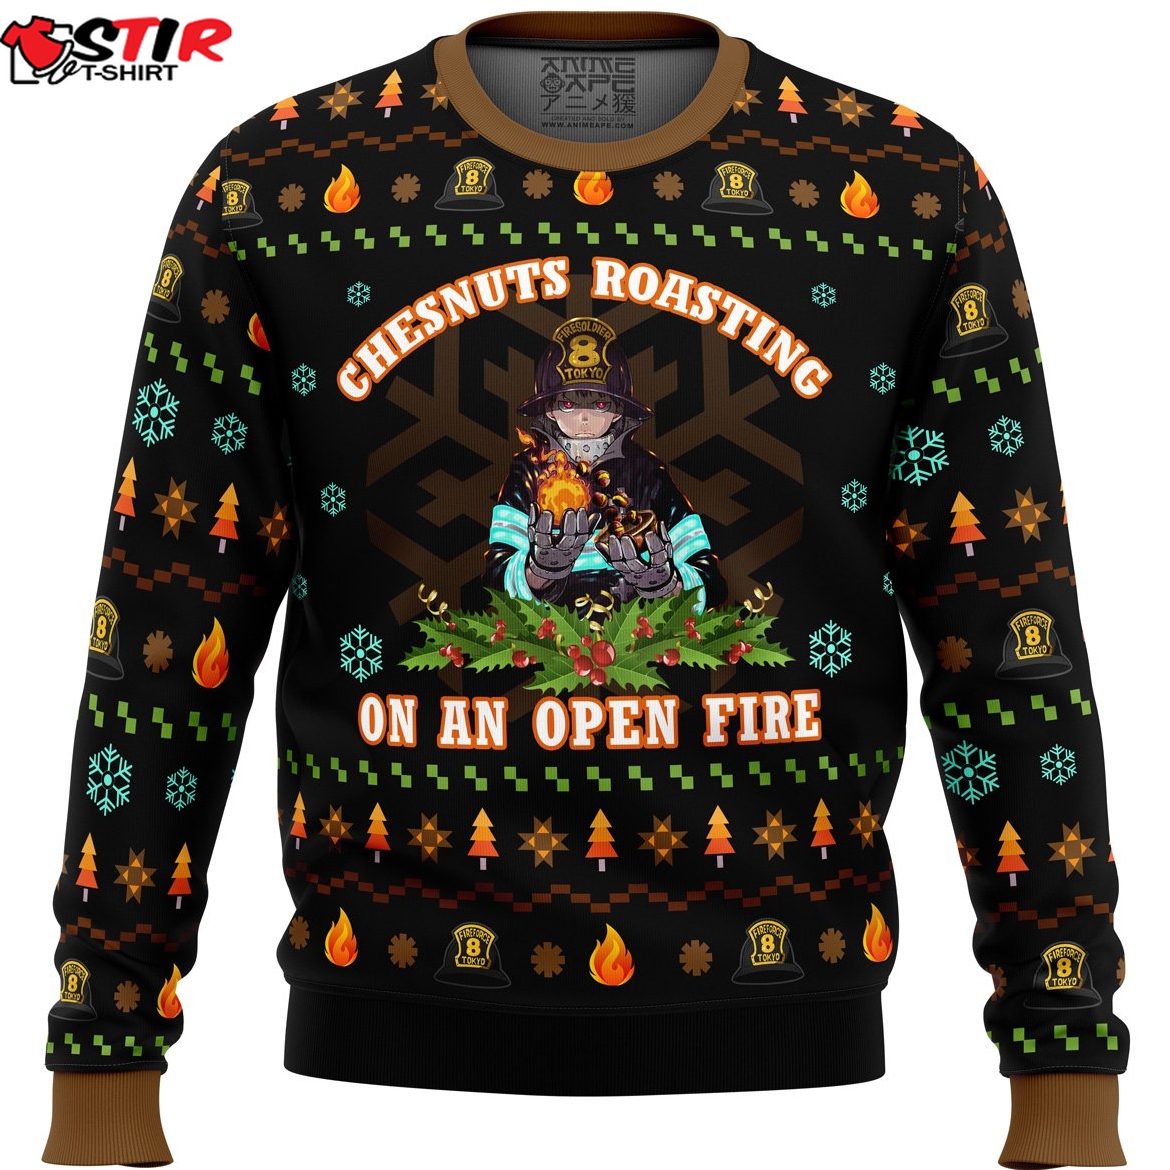 Fire Force Chesnuts Roasting Ugly Christmas Sweater Stirtshirt